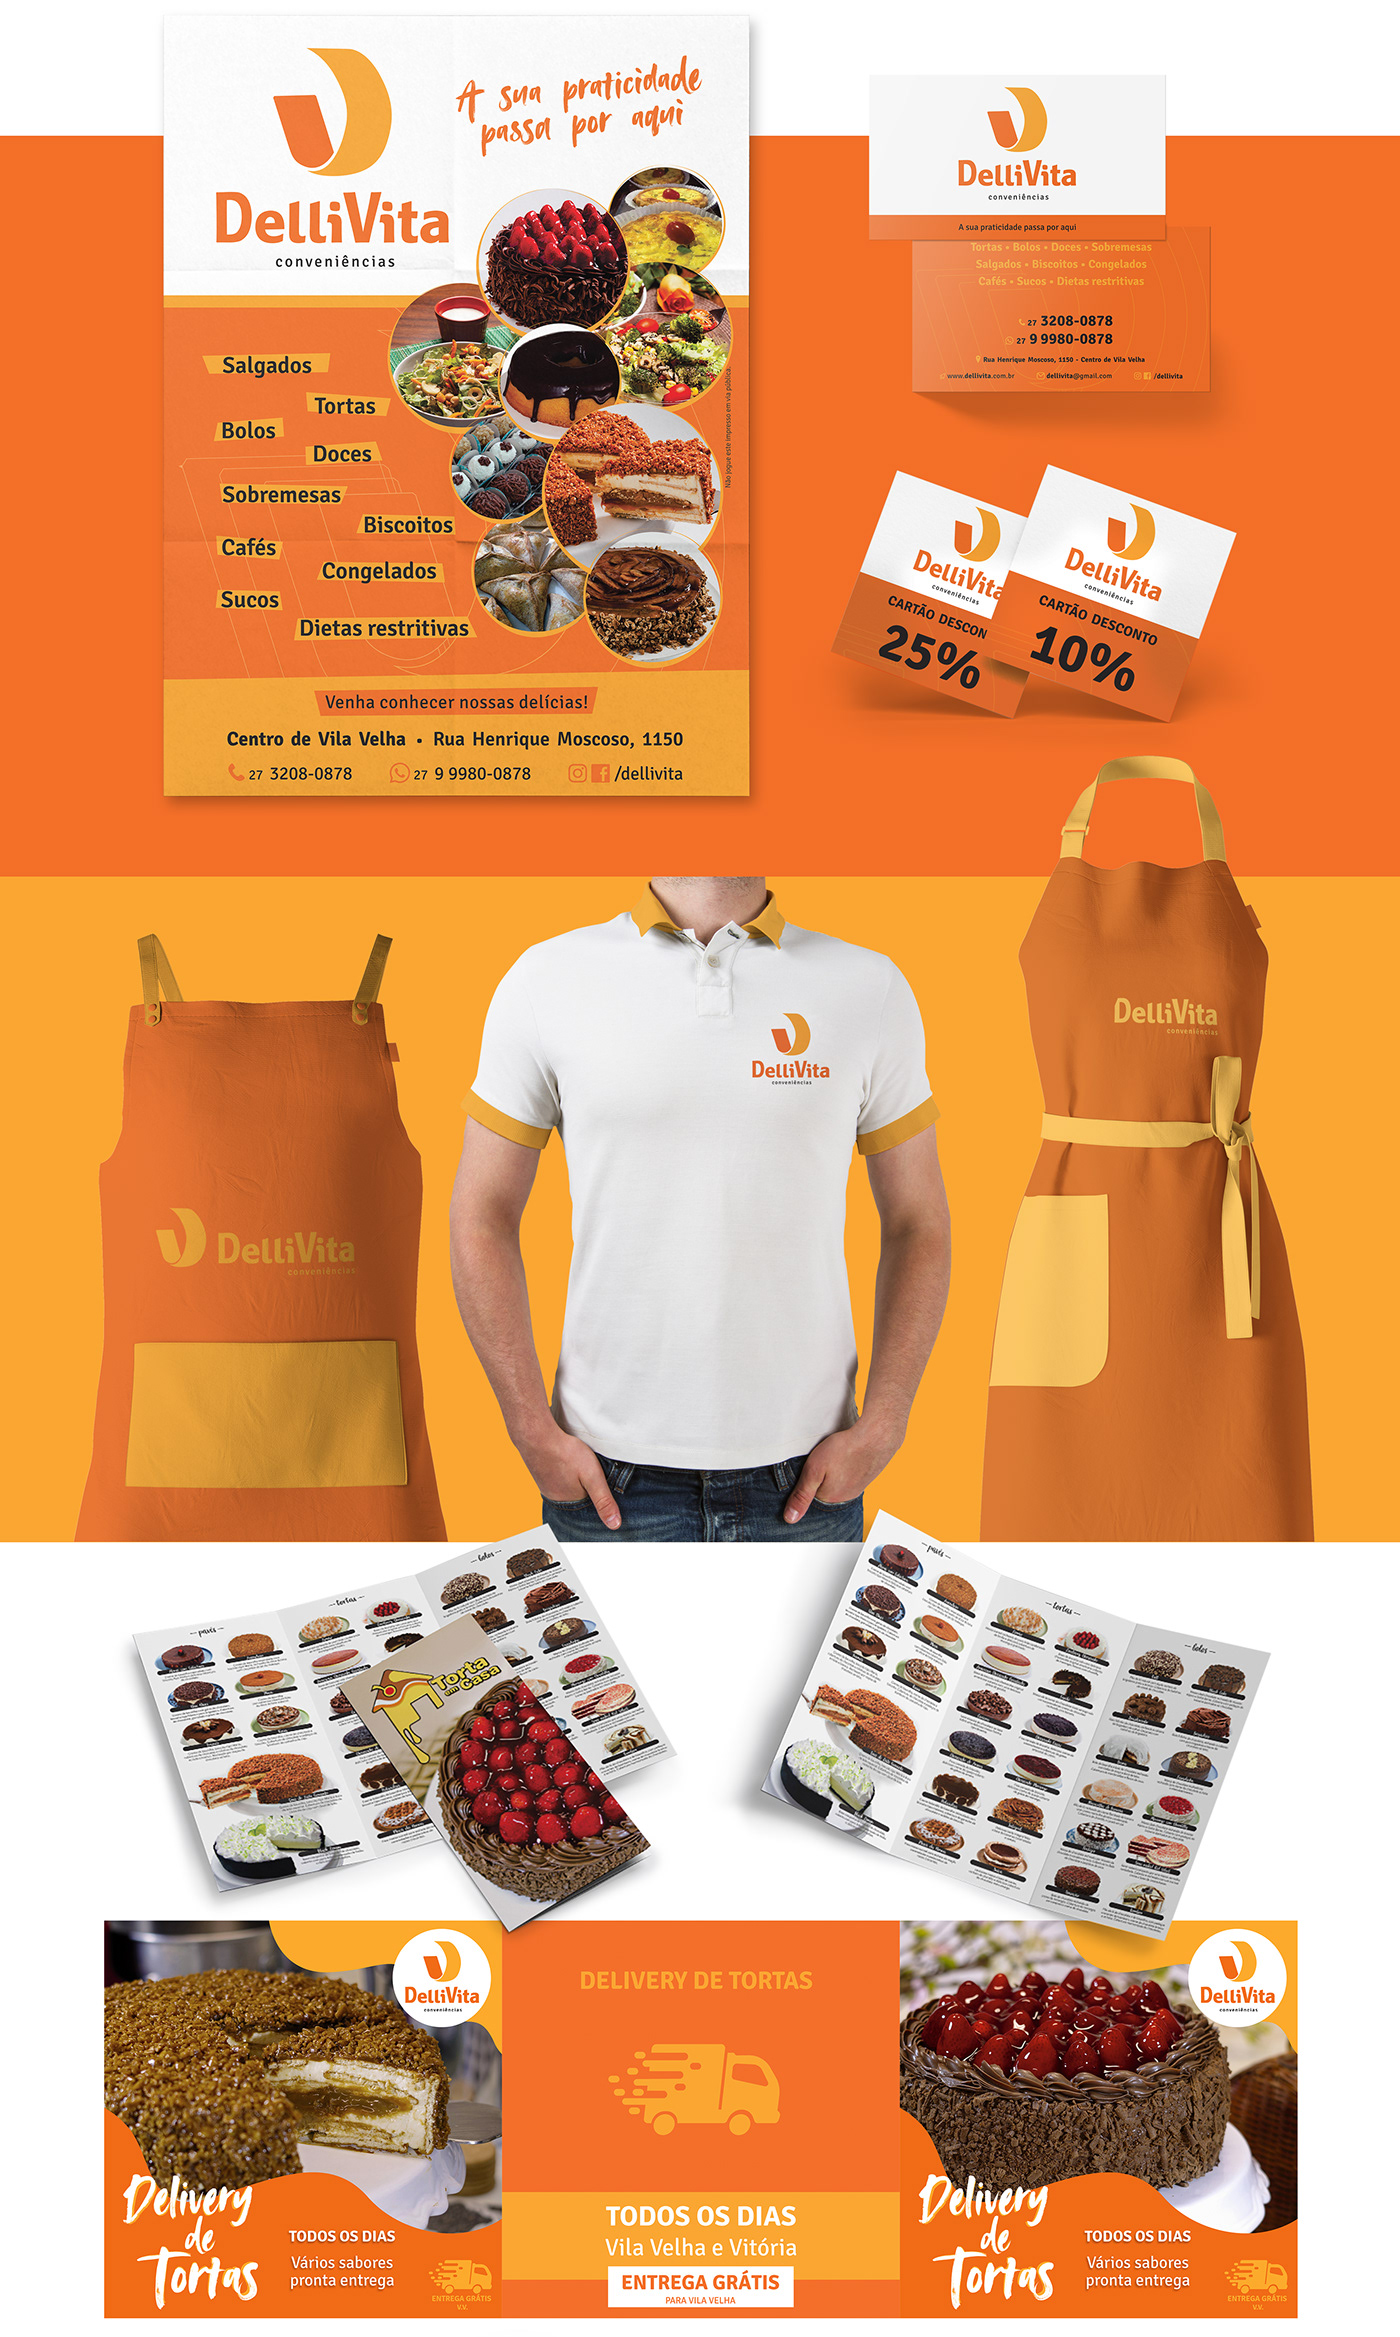 branding  delivery fastfood Food  ID logo package Paulo Arrivabene pauloarrivabene tasty